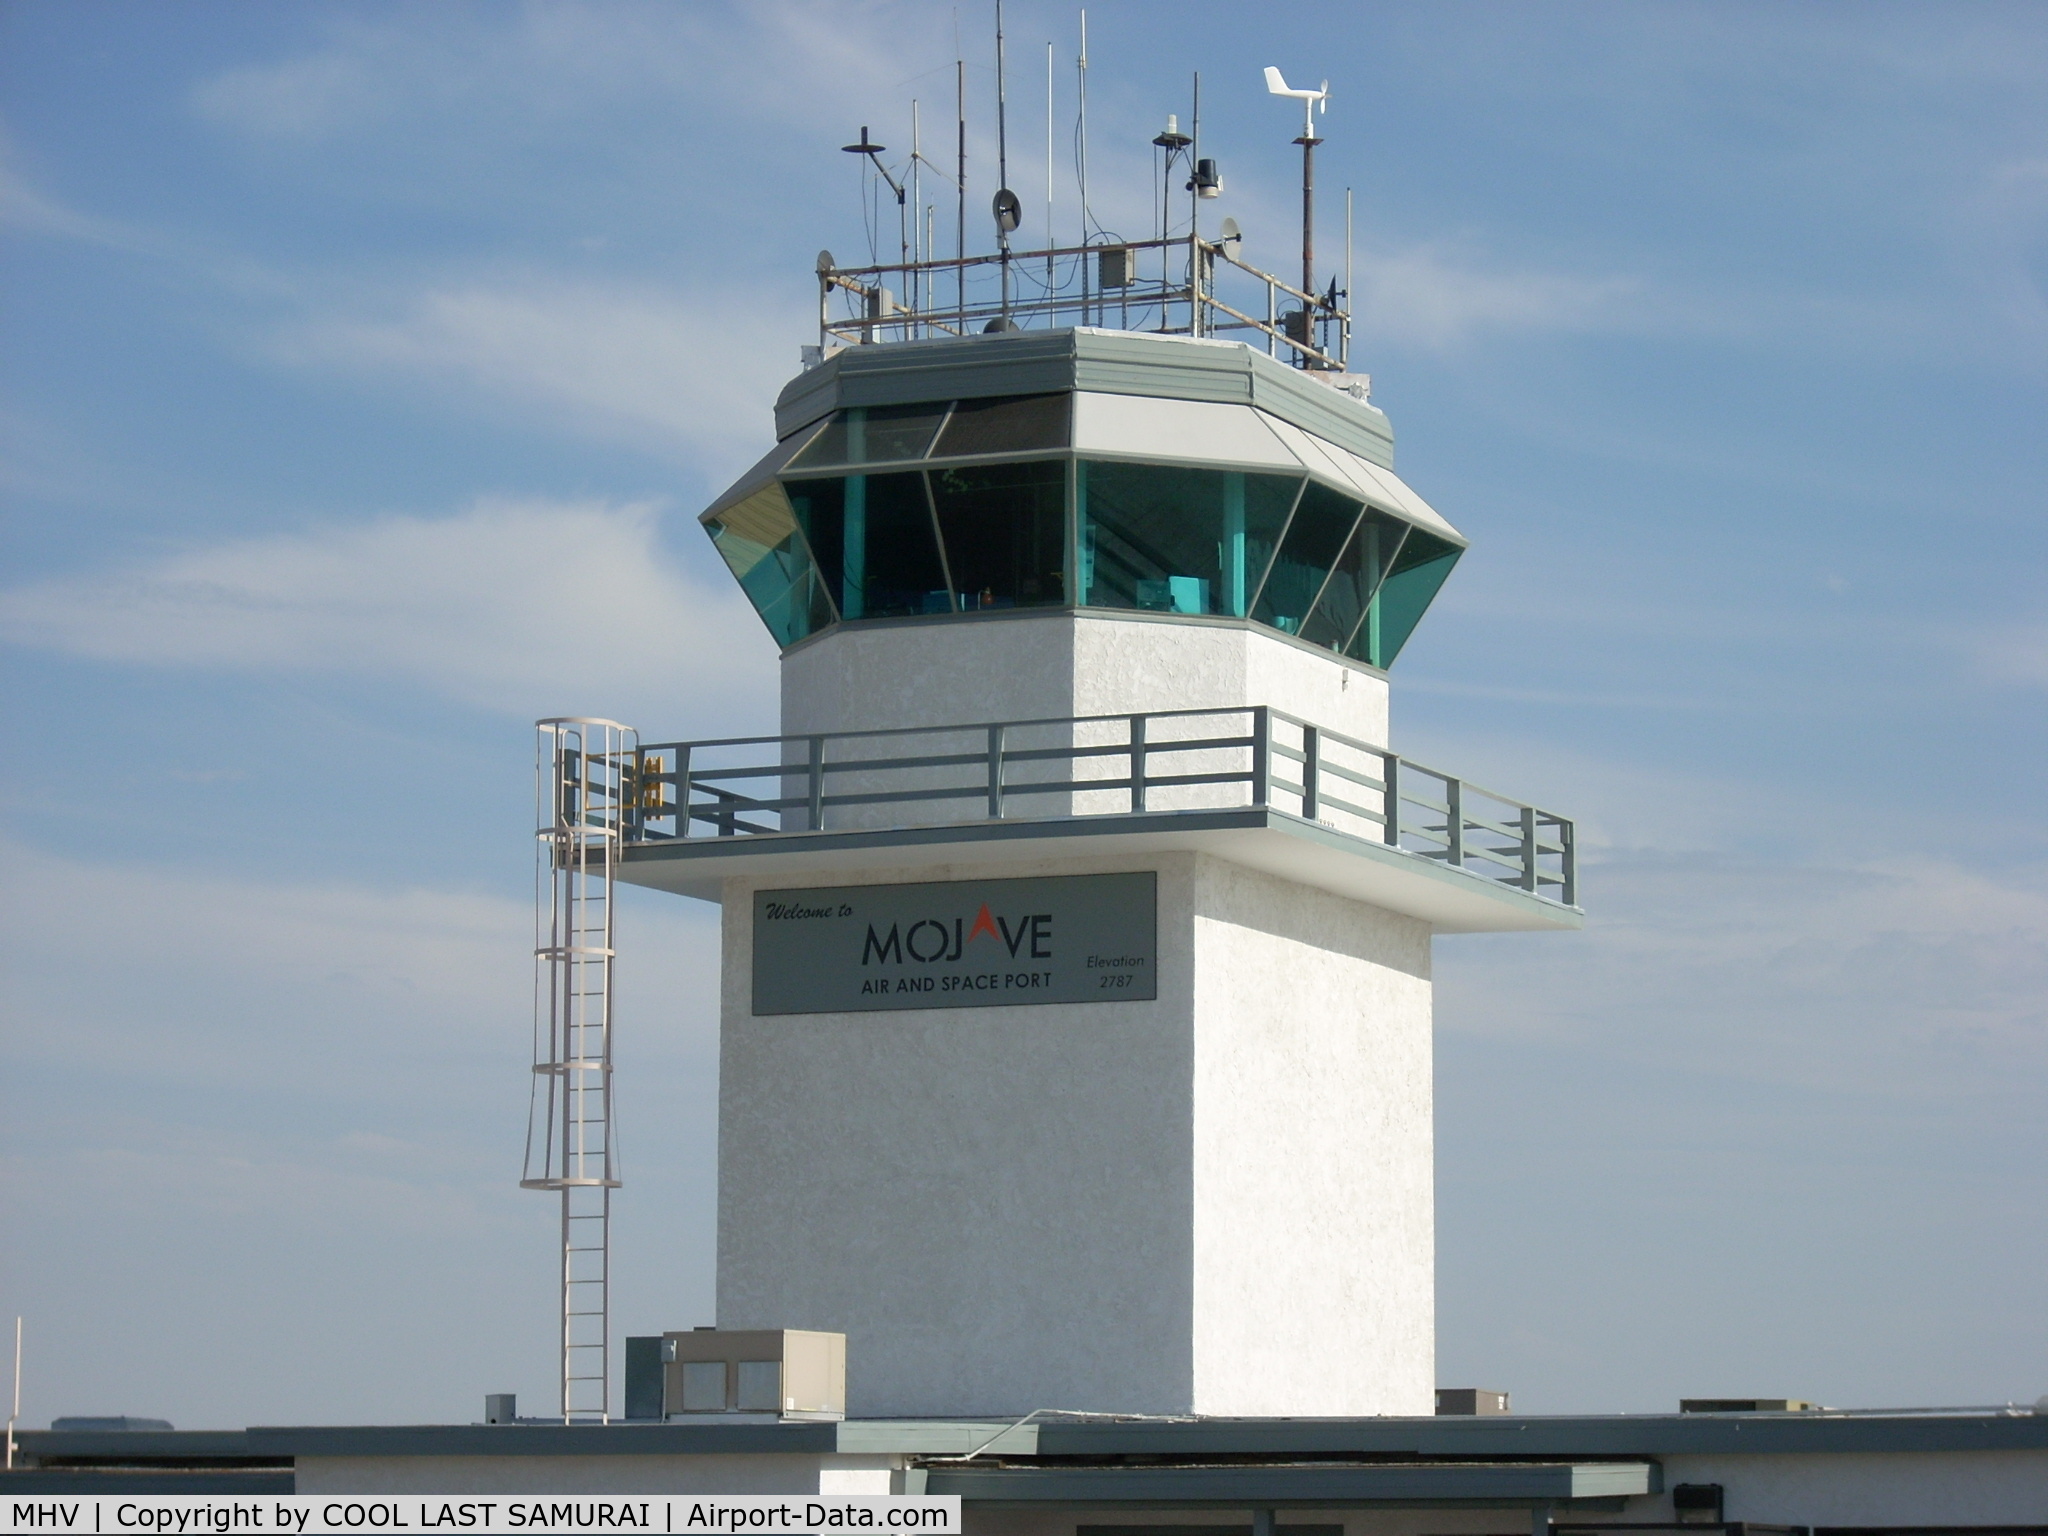 Mojave Airport (MHV) - MHV Tower